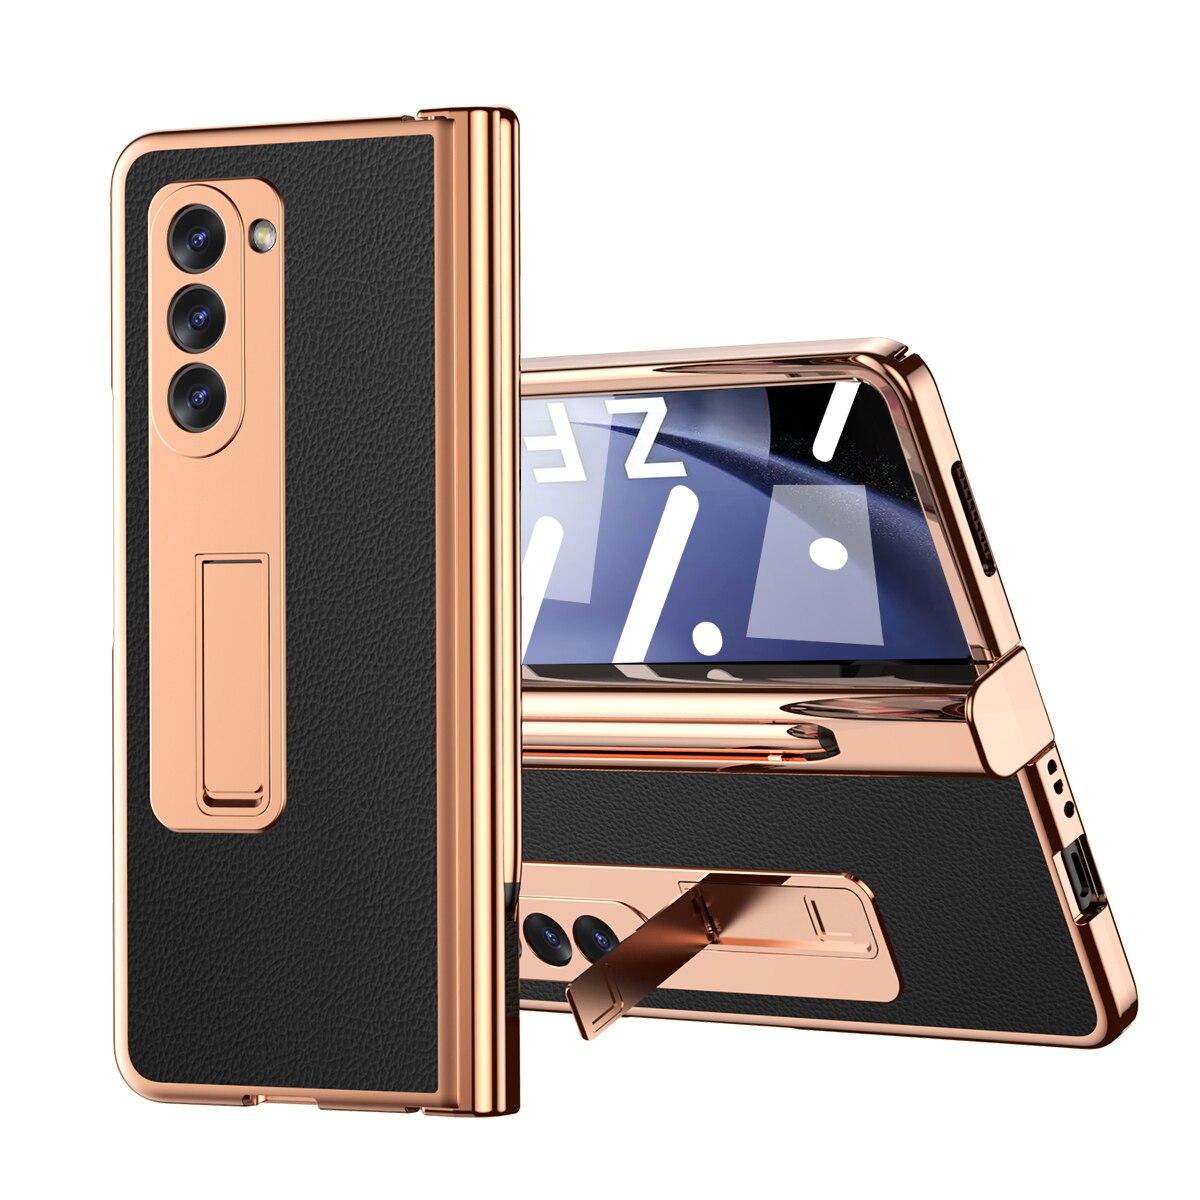 Decase Wallet Case for Samsung Galaxy Z Fold 5, Fashionable Soft Leather  Folio Case with Card Slot Holder Pen Slot Wrist Strap Shockproof  Scratch-Resistant Case Cover for Galaxy Z Fold 5,Gold 